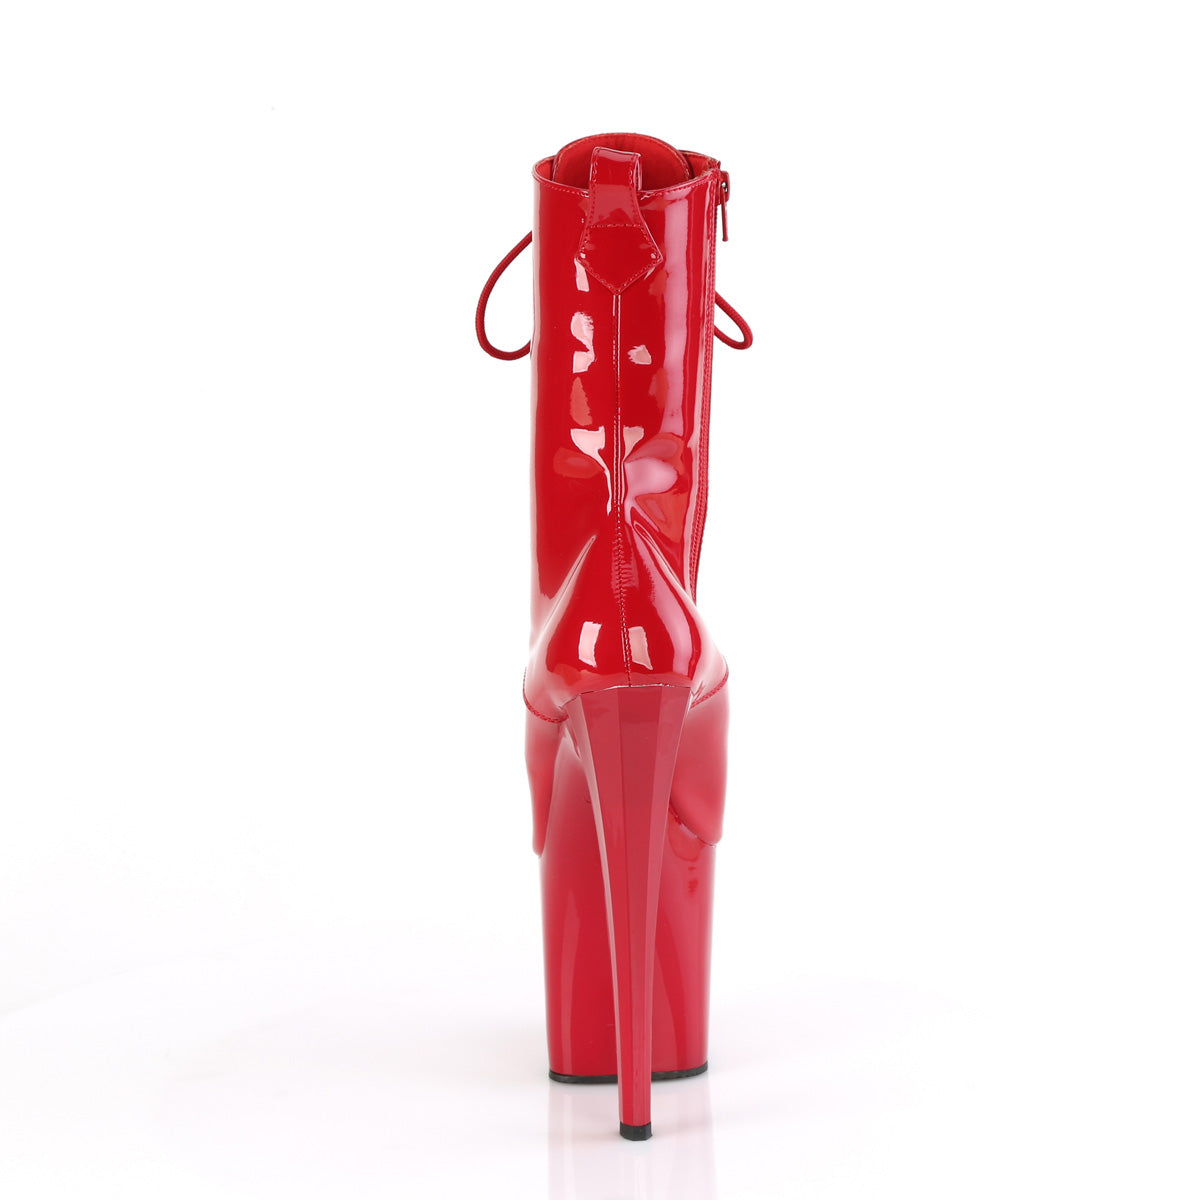 ENCHANT-1040 Pleaser Red Patent/Red Platform Shoes [Kinky Boots]